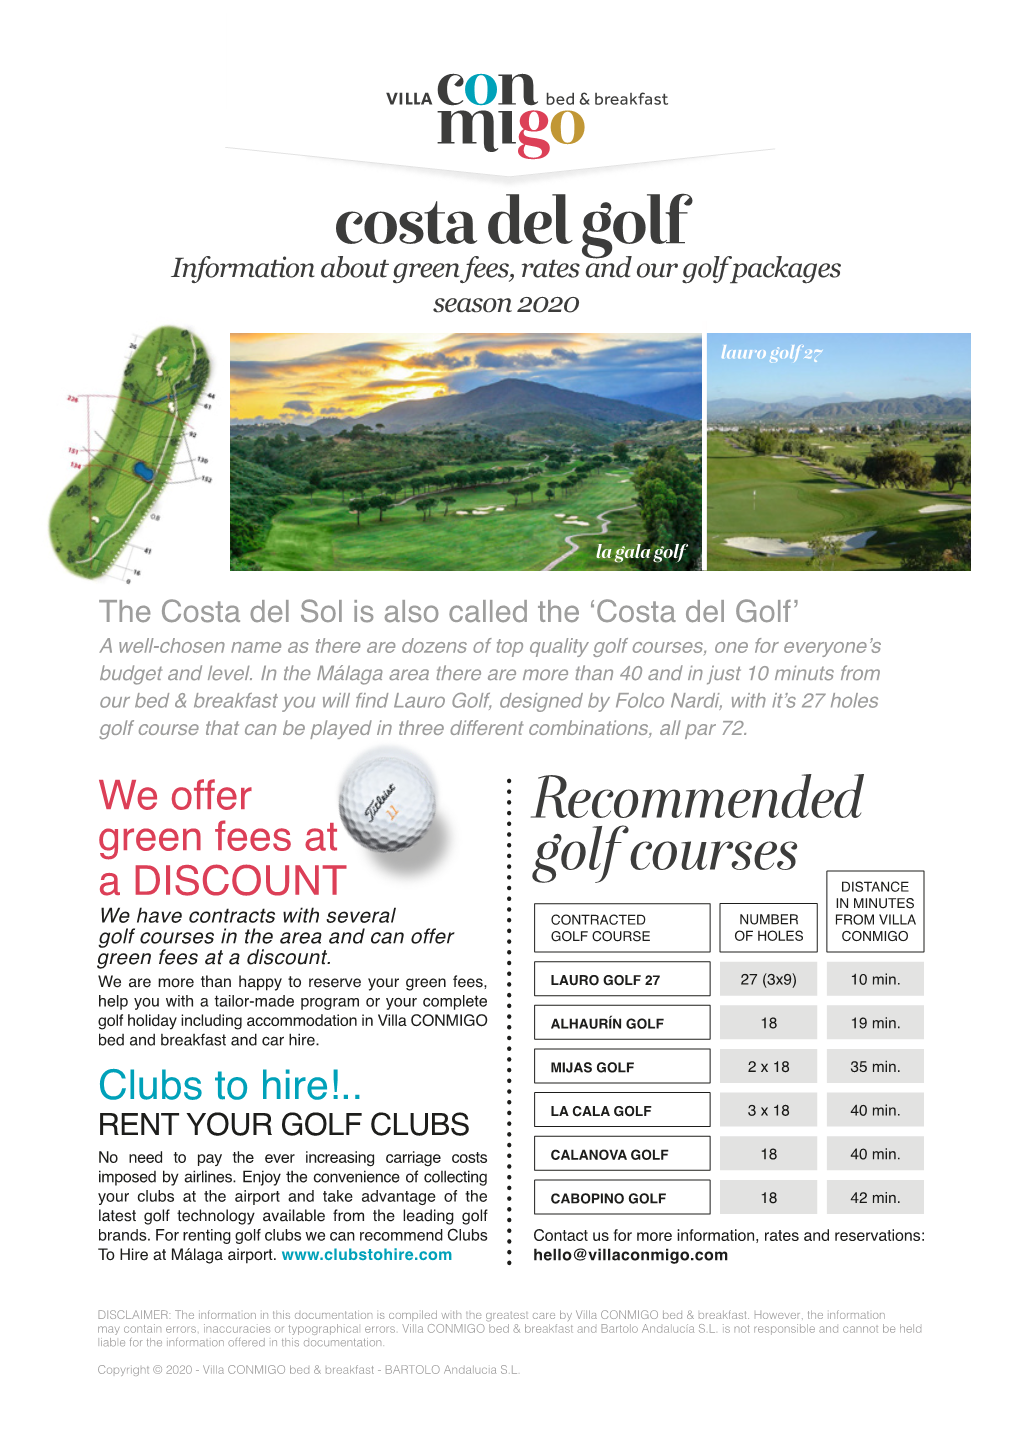 Costa Del Golf Information About Green Fees, Rates and Our Golf Packages Season 2020